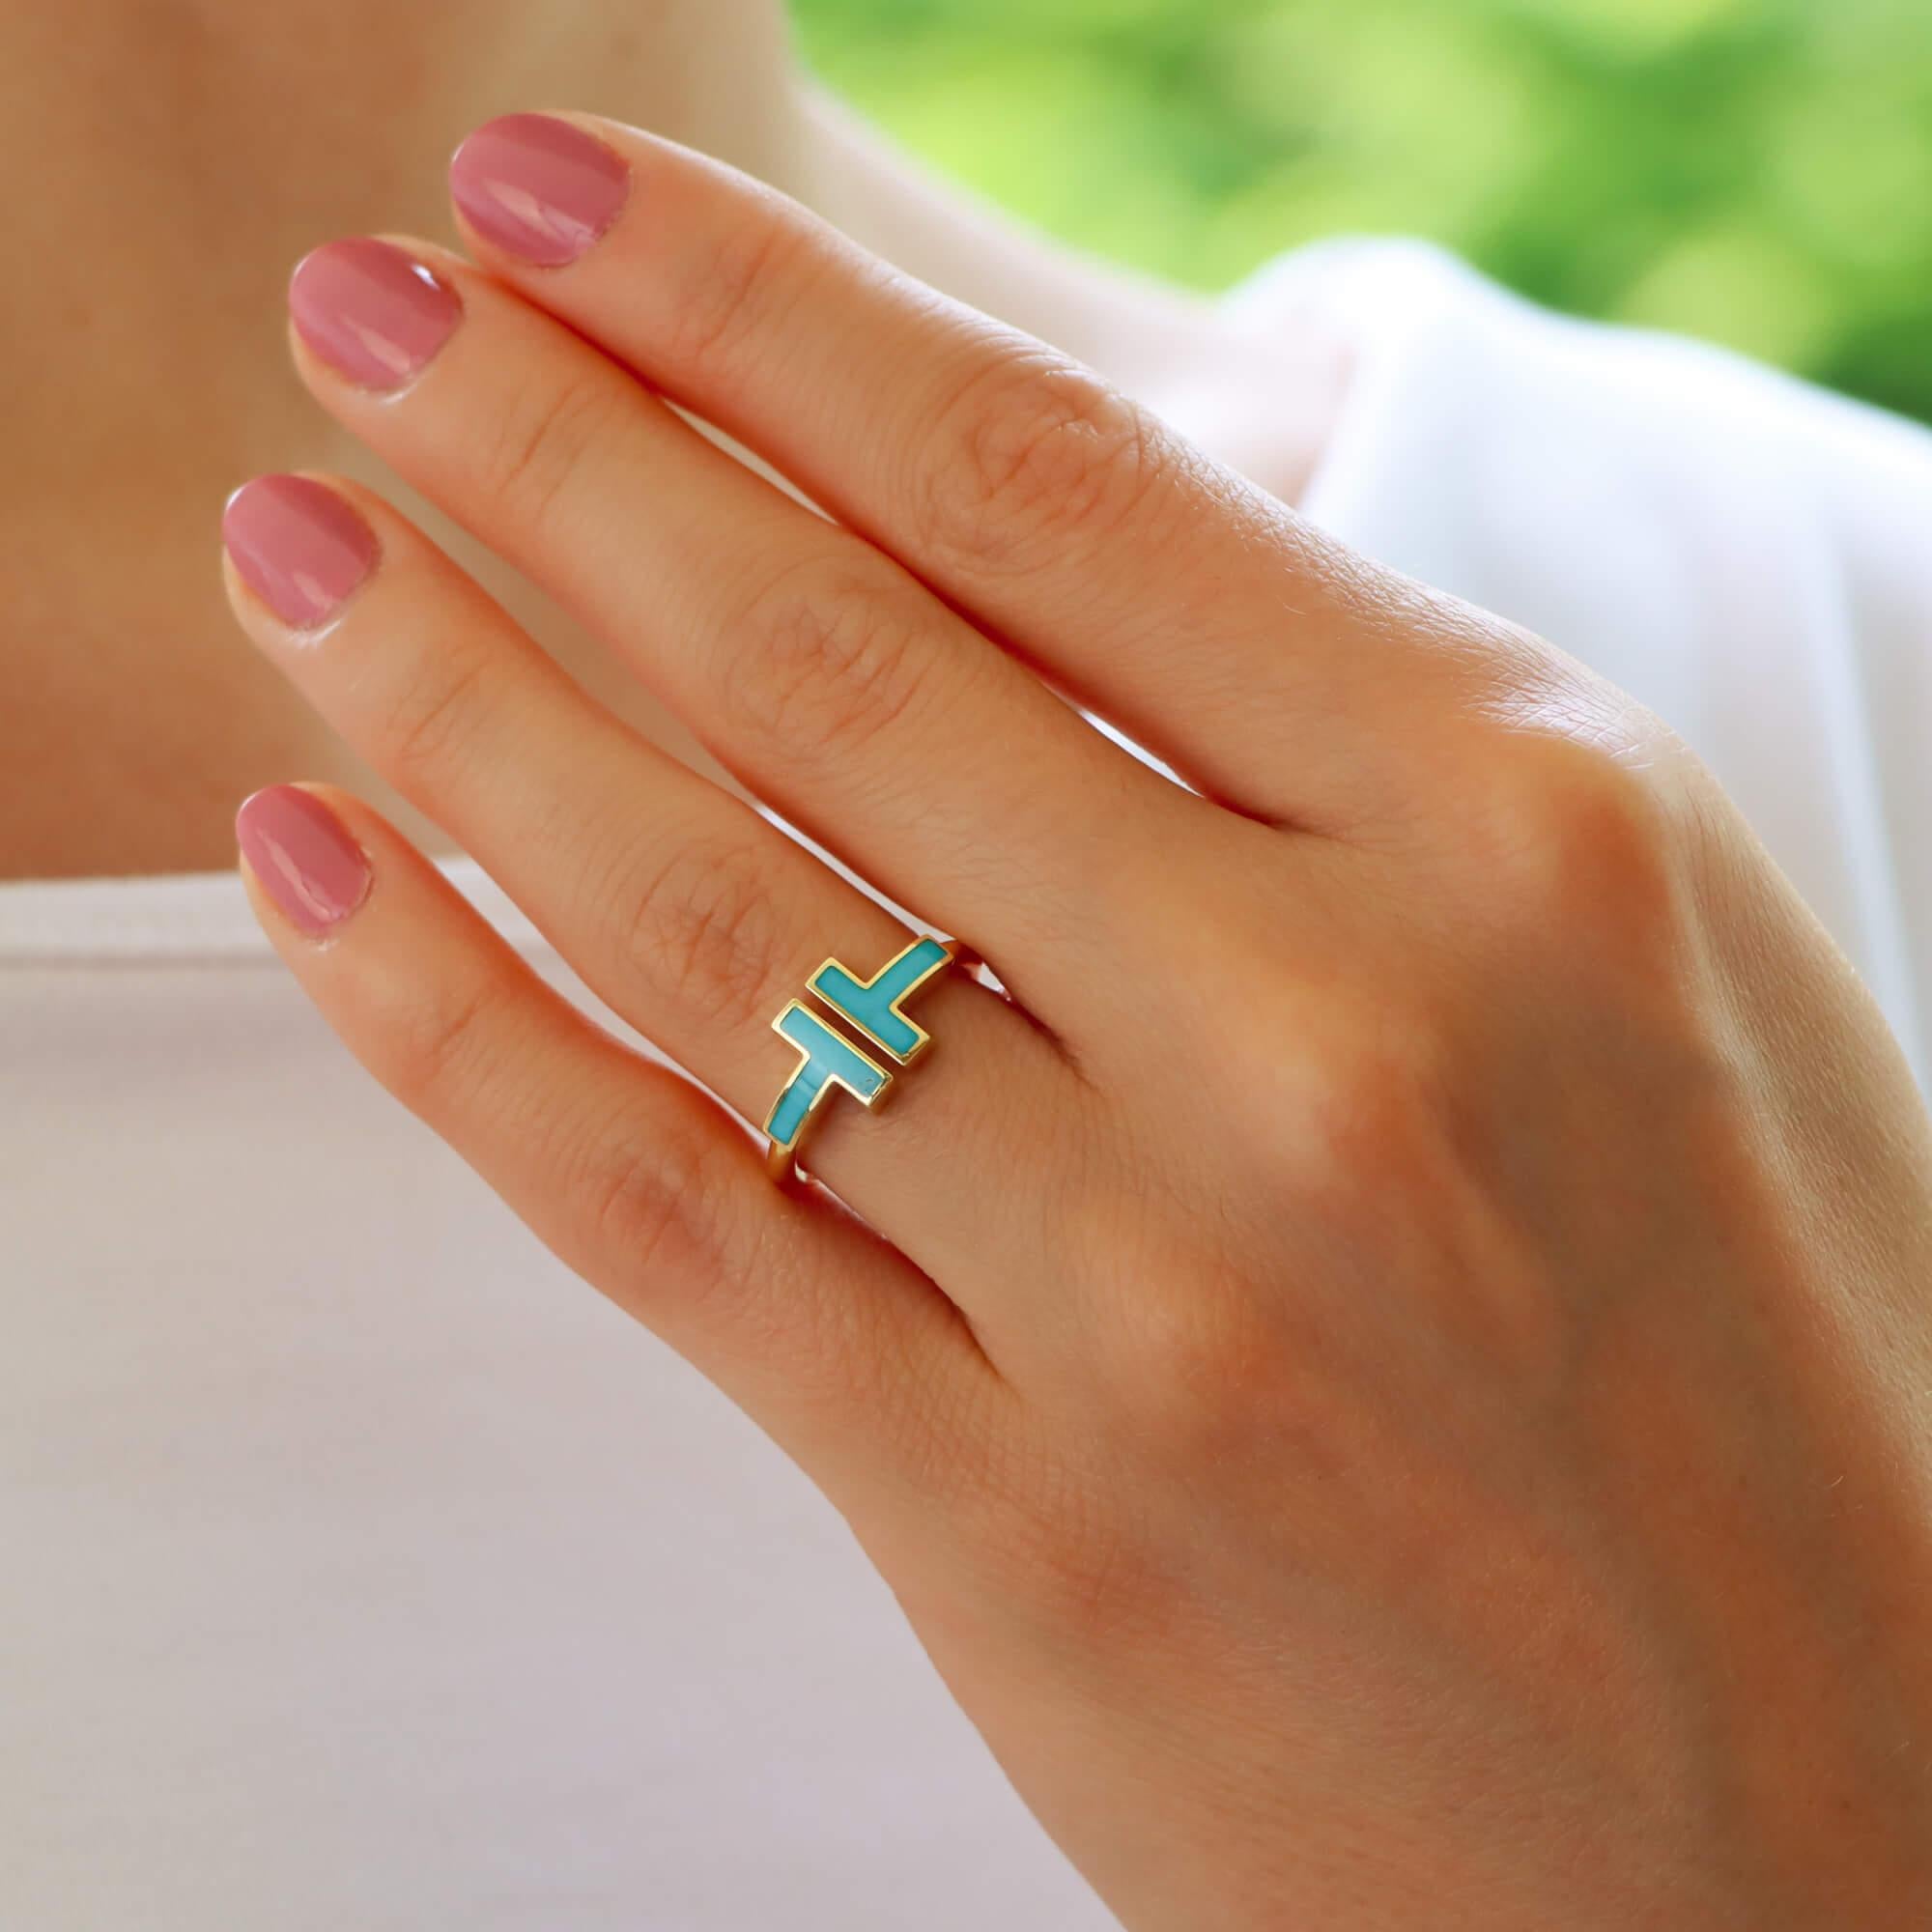 A stylish vintage Tiffany & Co. 'Tiffany T' turquoise ring set in 18k yellow gold.

From the current Tiffany T collection, the ring is set with two carved pieces of natural turquoise in a polished yellow gold band design. The natural formation of